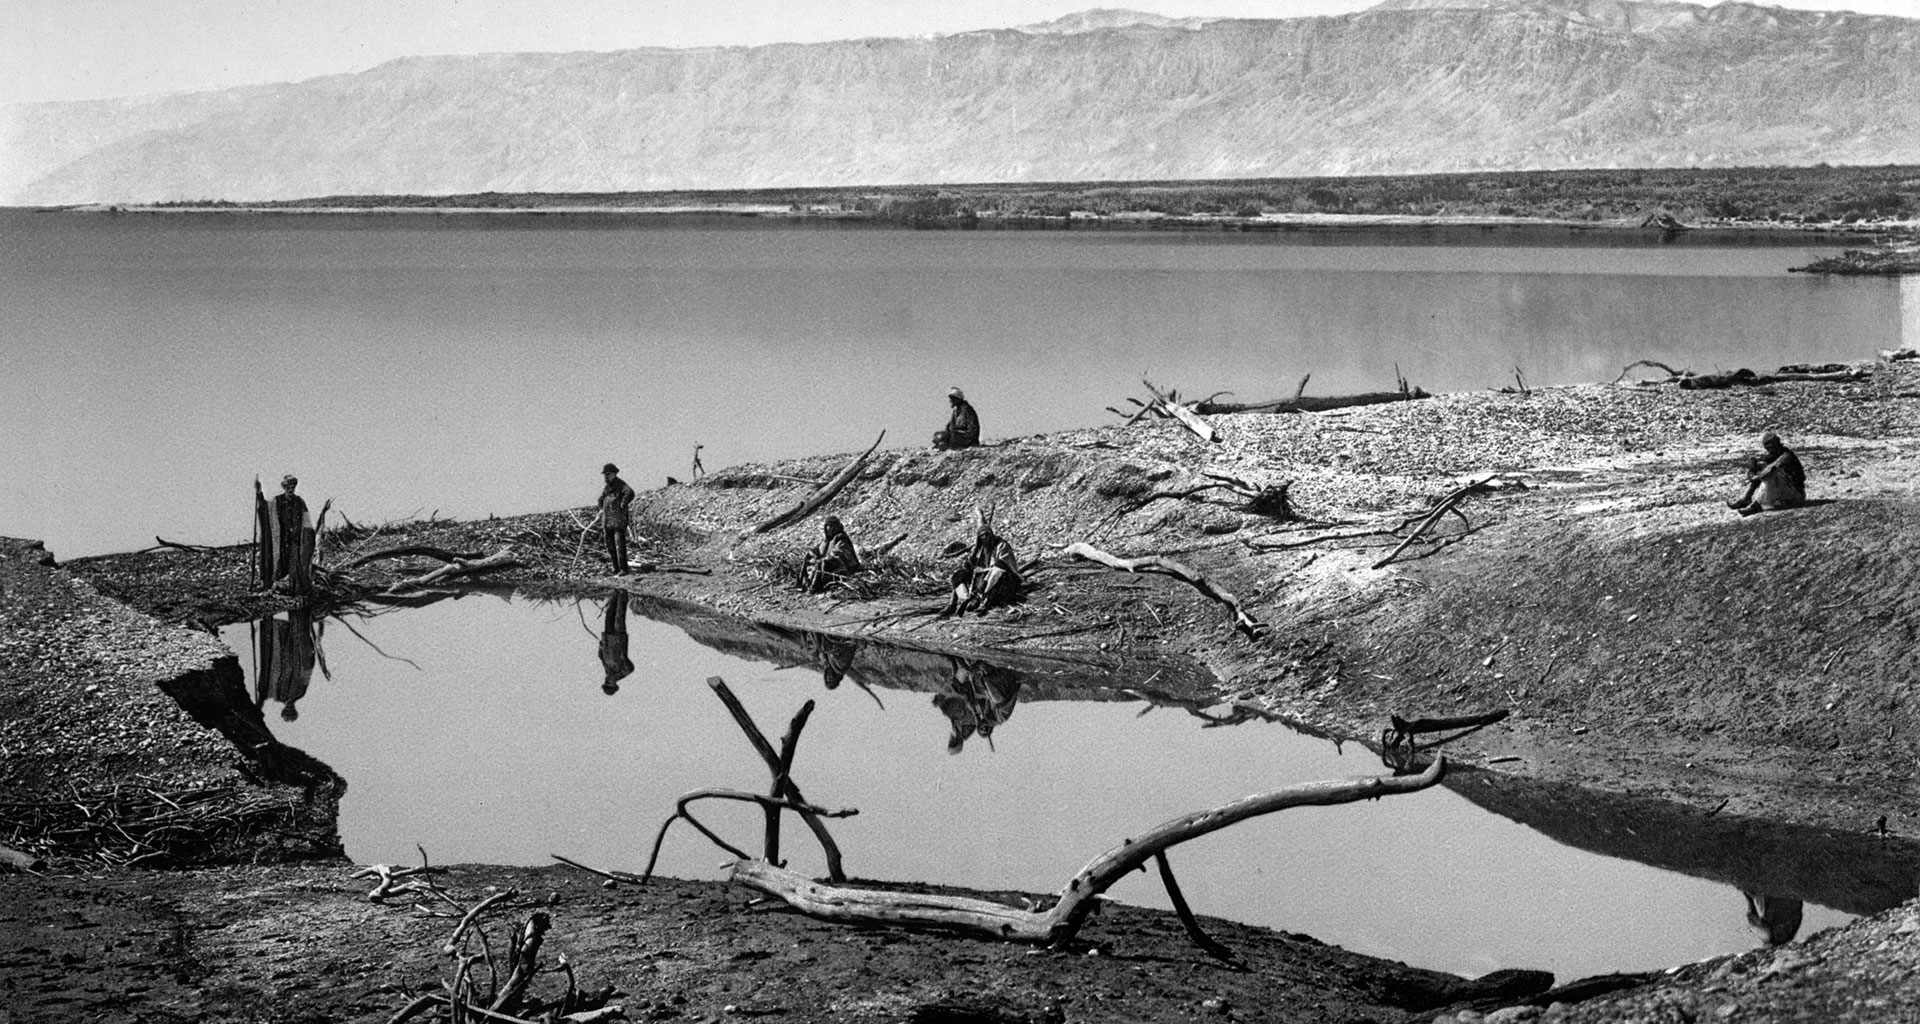 The northern shore of the Dead Sea, 1920s. (Matson Collection, Library of Congress)